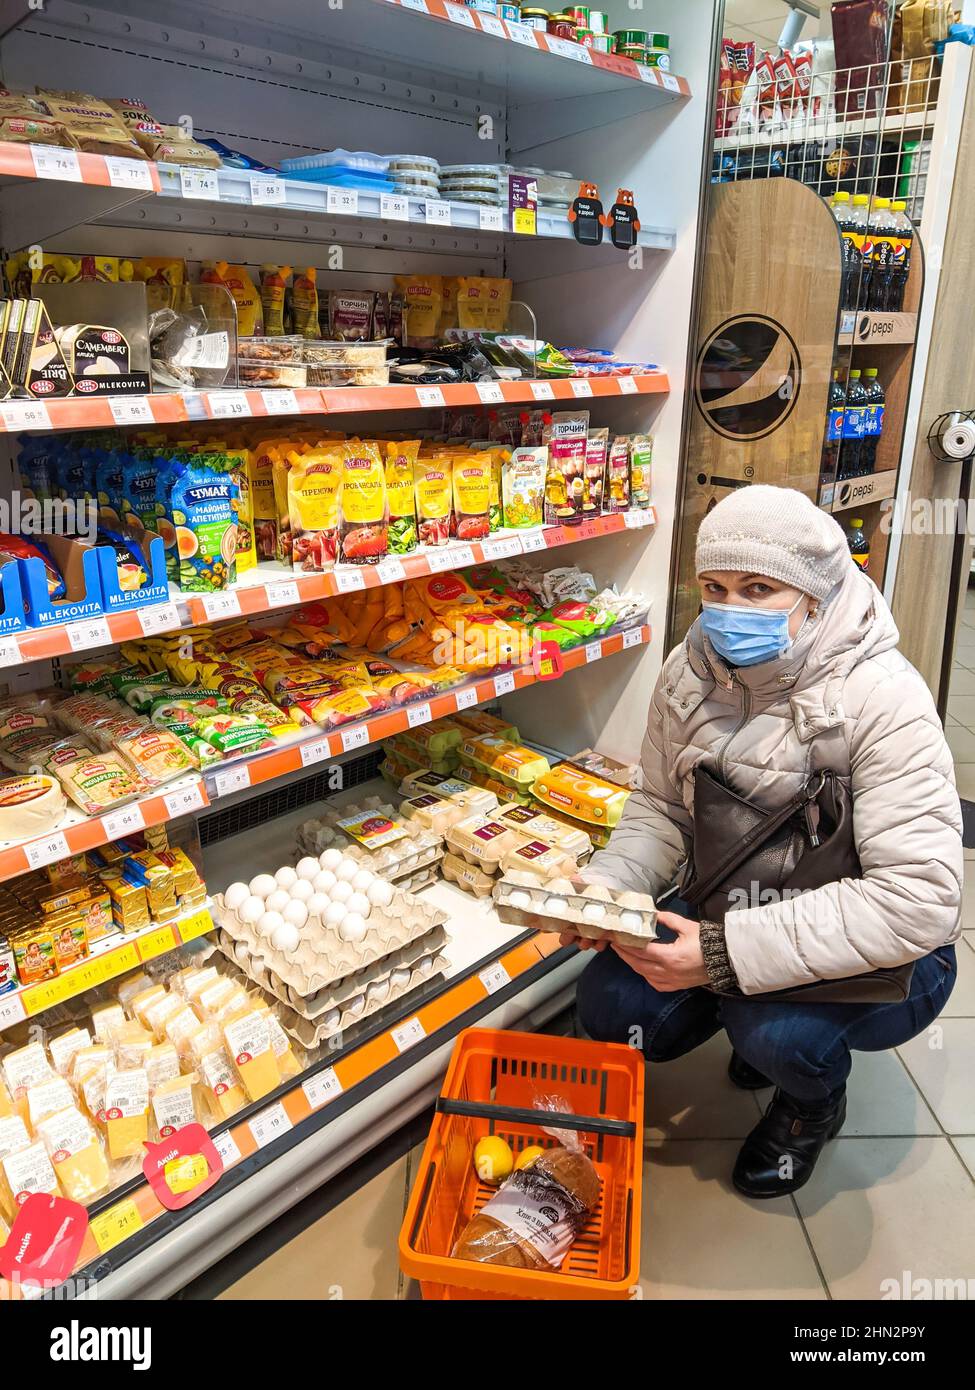 Volodymyr, Ukraine - 13.02.2022: woman choosing eggs in supermarket with different products. Supermarket aisle with colorful shelves of merchandise. R Stock Photo